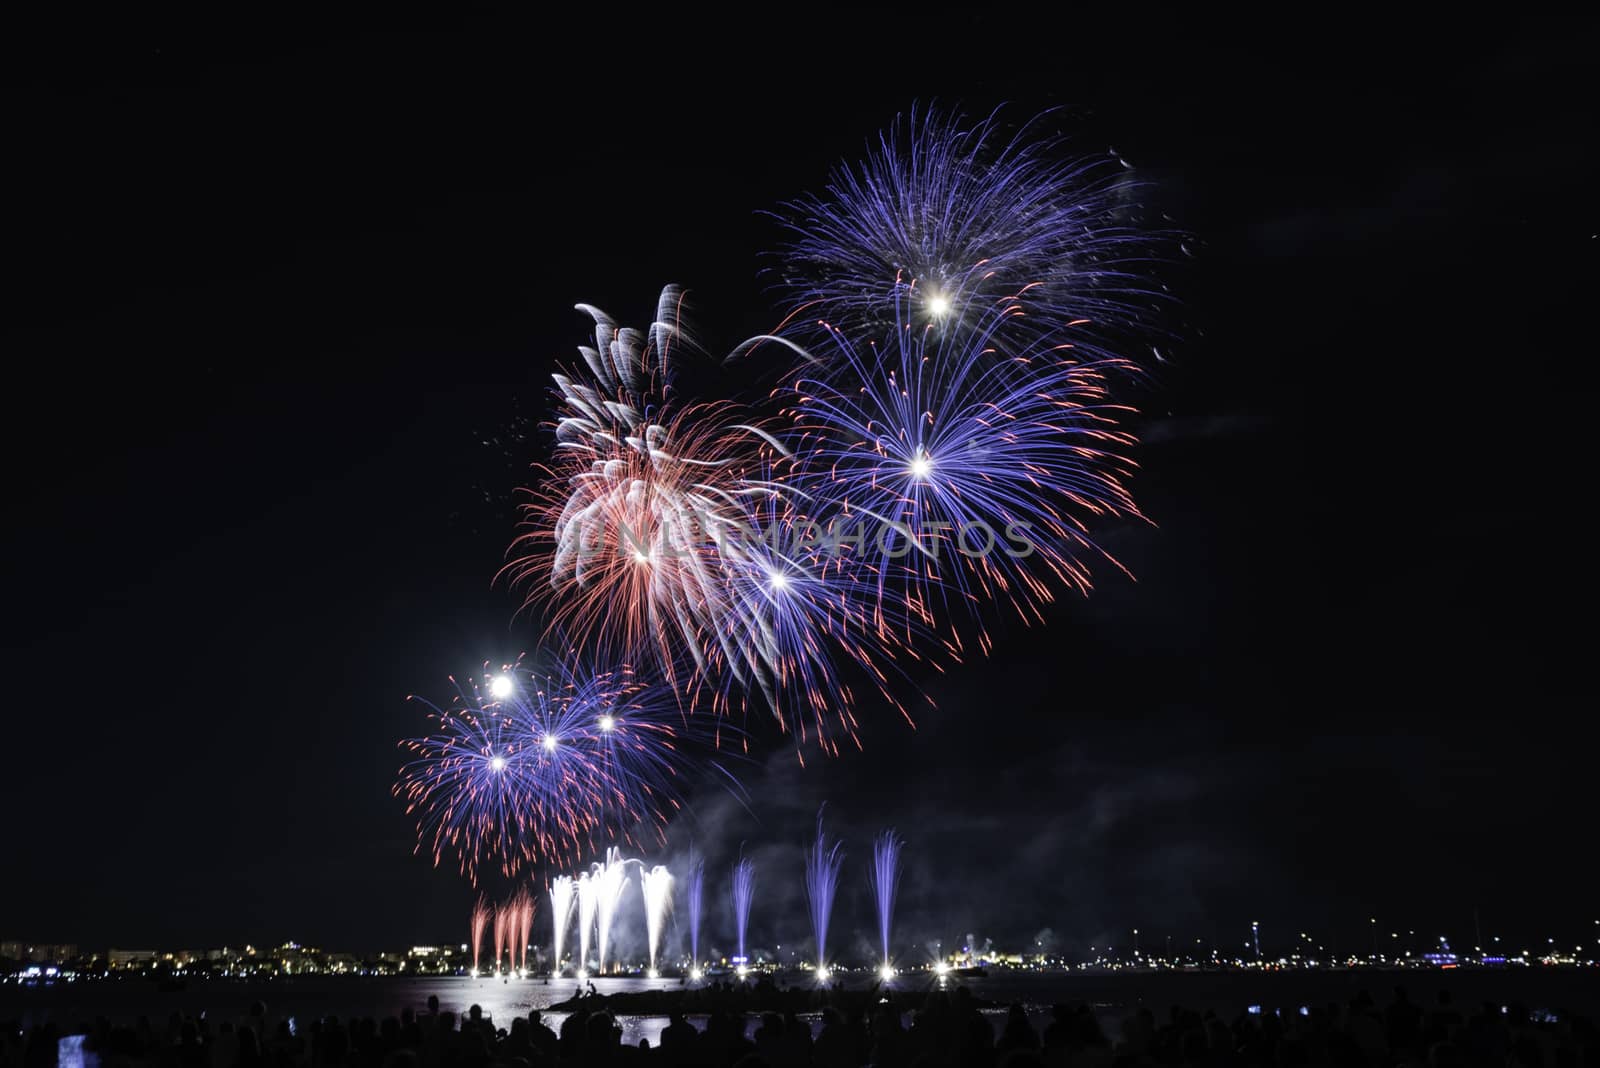 Scenic fireworks glowing in the night for the 14th of July celebrations in the harbor of Cannes, Cote d'Azur, France